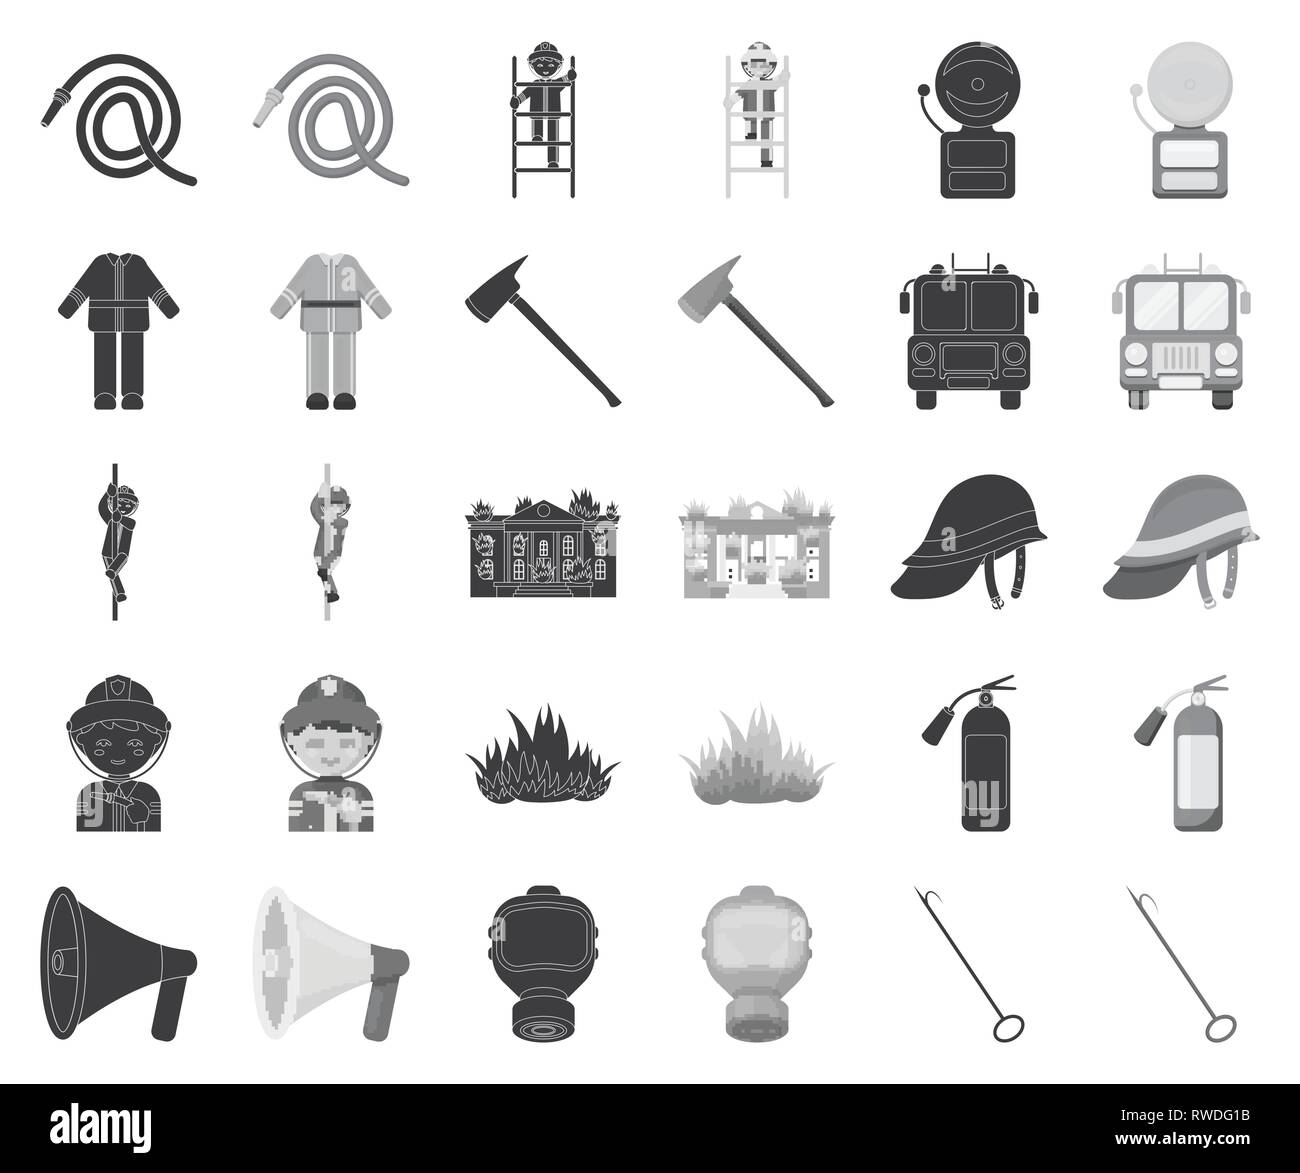 accessories,apparatus,art,attribute,axe,black,monochrome,bucket,building,bunker,collection,conical,department,design,equipment,extinguishing,extingushier,fire,firefighter,firefighting,flame,gas,gear,helmet,icon,illustration,isolated,logo,mask,organization,pike,pole,pump,ring,separation,service,set,sign,slide,symbol,tools,vector,web Vector Vectors , Stock Vector